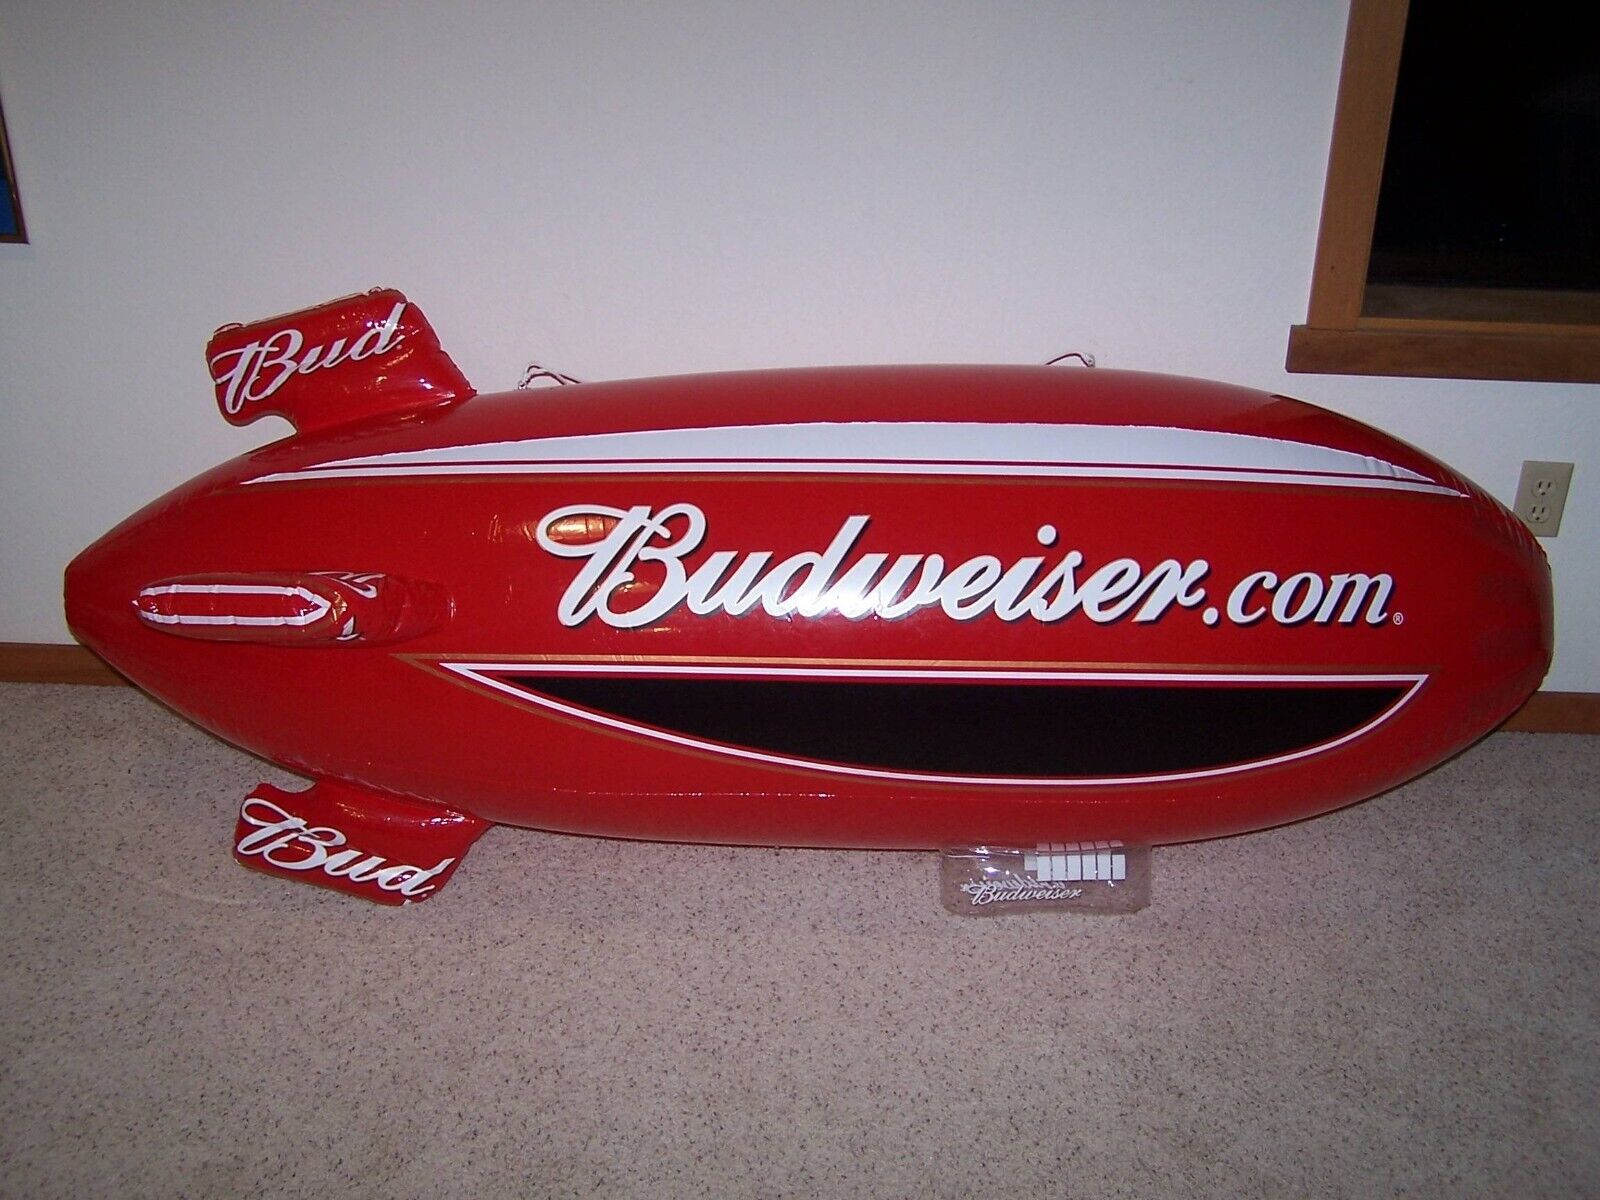 Rare Giant 6 Foot Inflatable Budweiser Blimp in Sealed Bag Bud Airship Blow Up